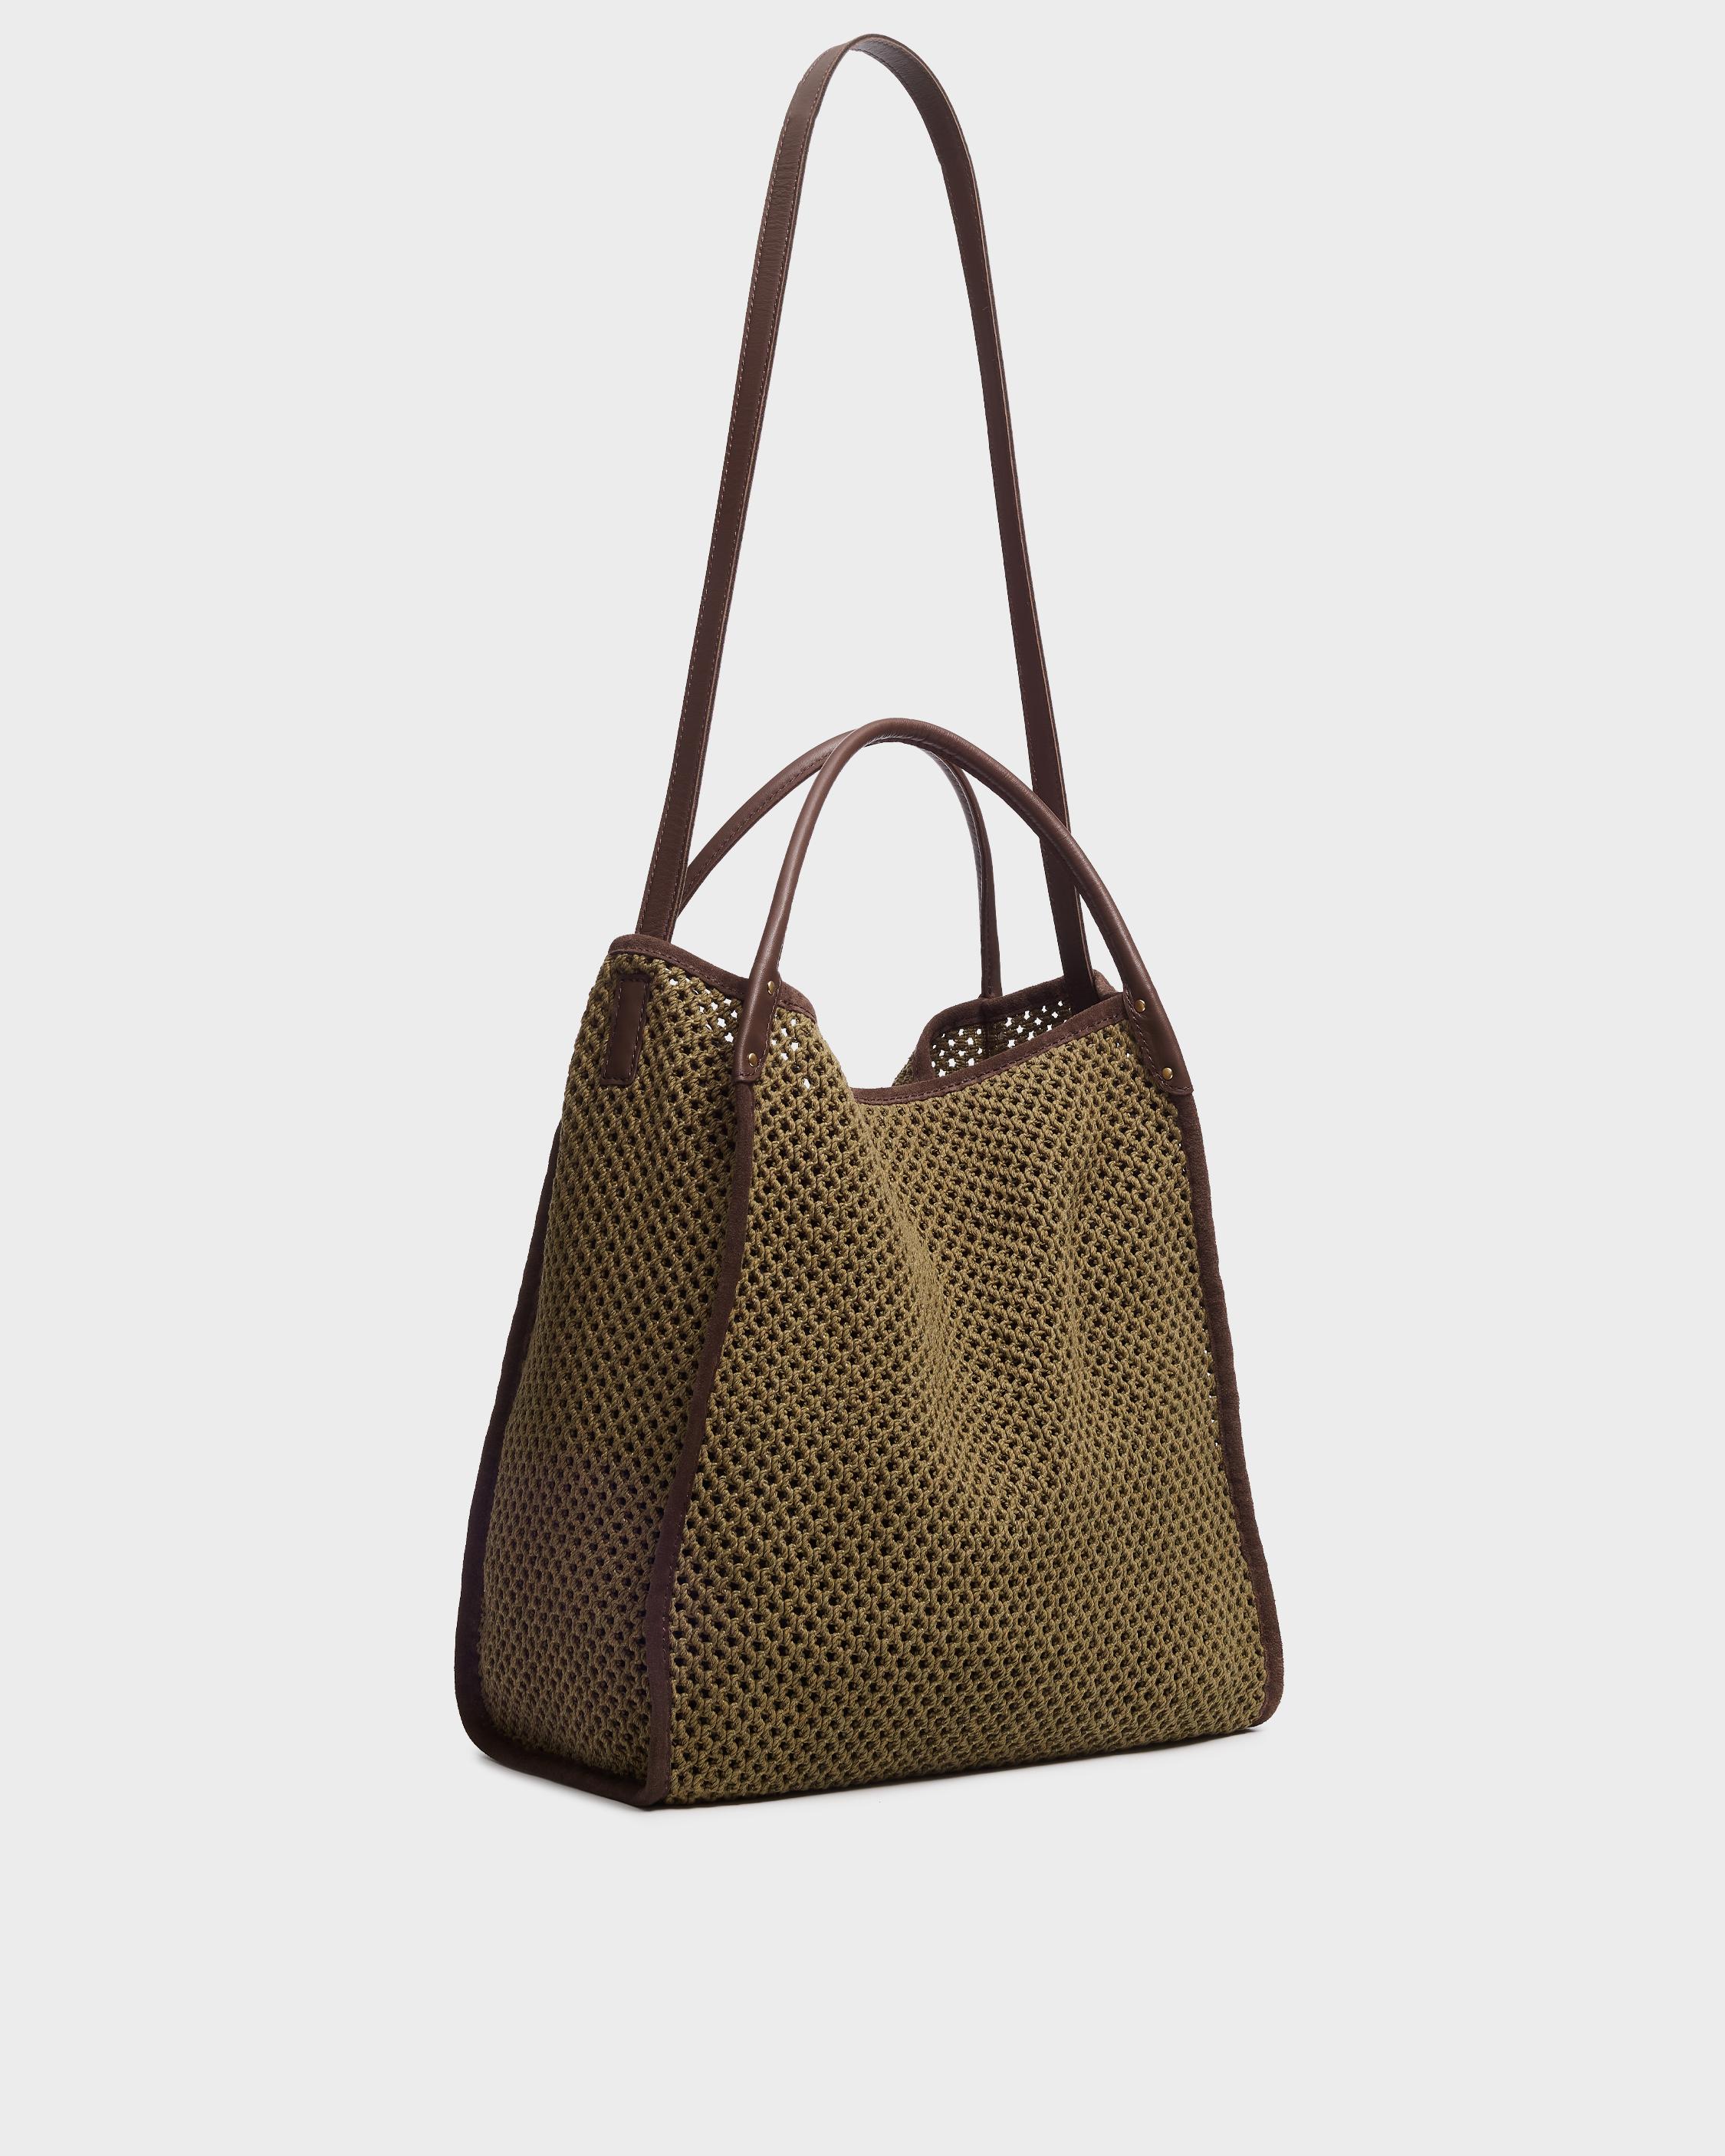 Summer Passenger Tote - Leather and Recycled Materials - Safari